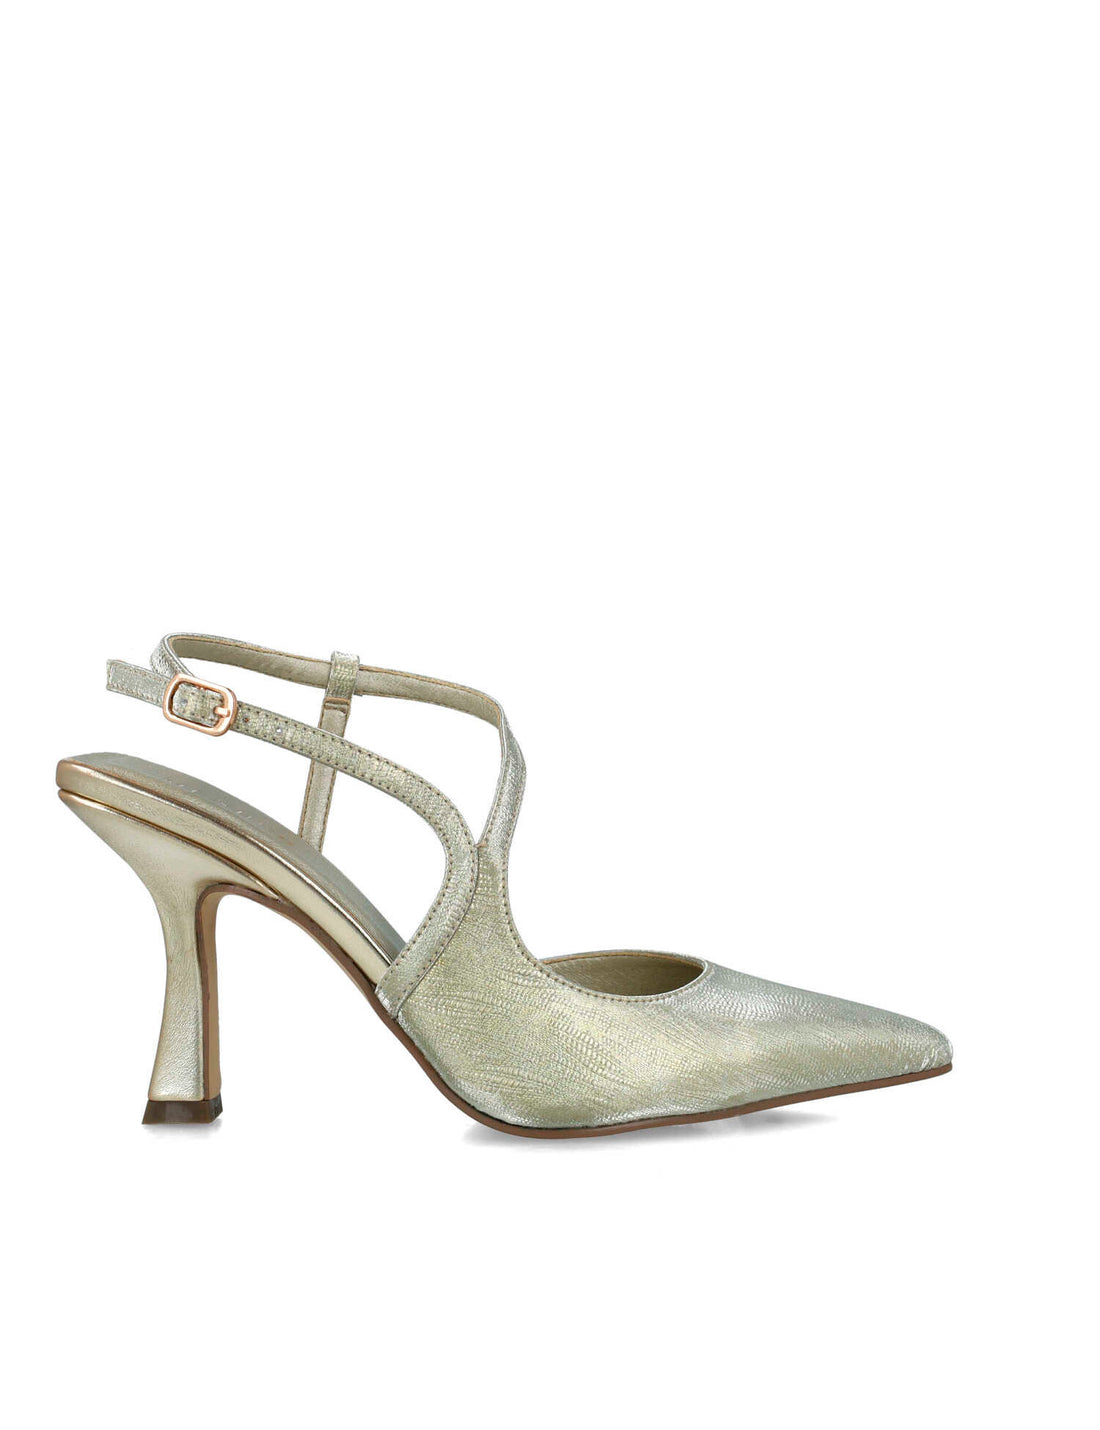 Gold Pumps With Ankle Strap_24767_00_01